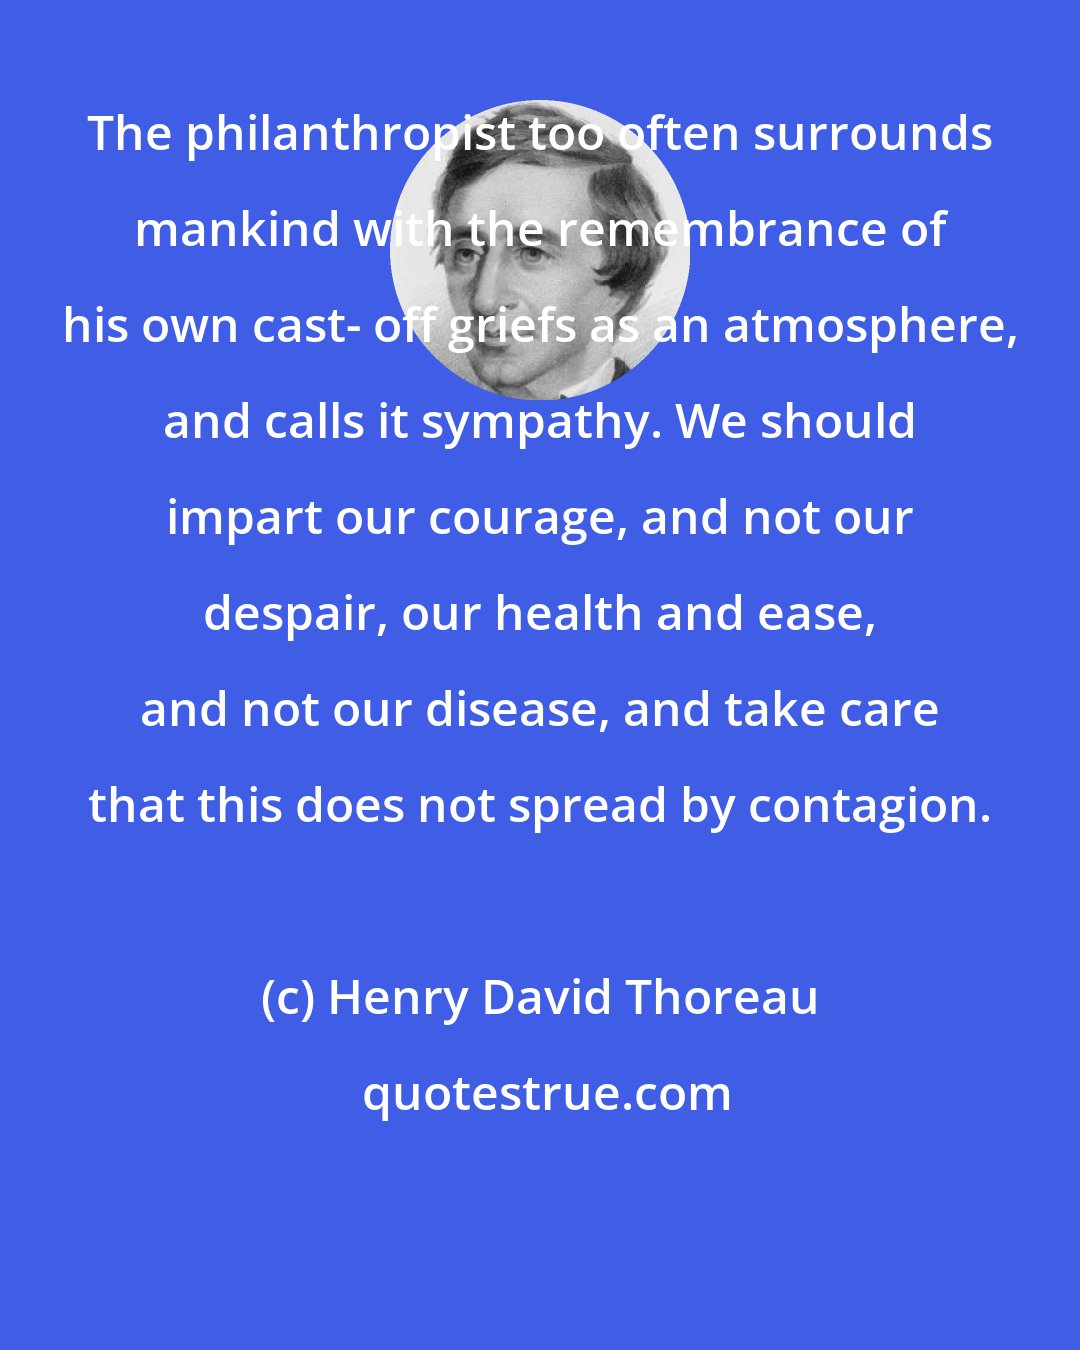 Henry David Thoreau: The philanthropist too often surrounds mankind with the remembrance of his own cast- off griefs as an atmosphere, and calls it sympathy. We should impart our courage, and not our despair, our health and ease, and not our disease, and take care that this does not spread by contagion.